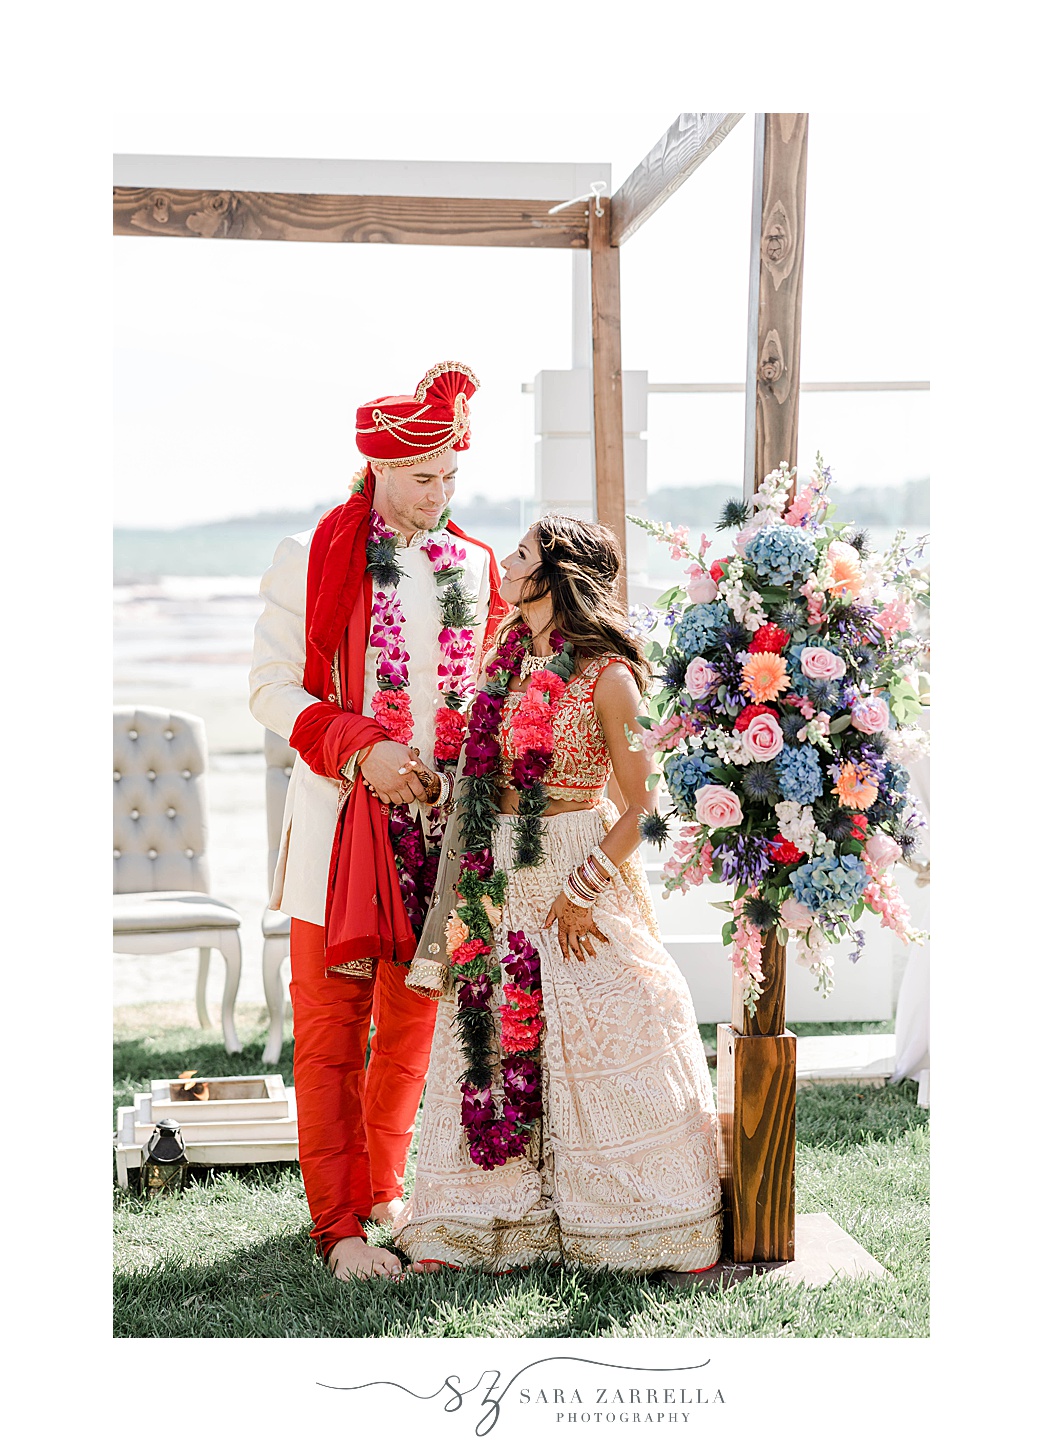 traditional Indian wedding ceremony at Newport Beach House